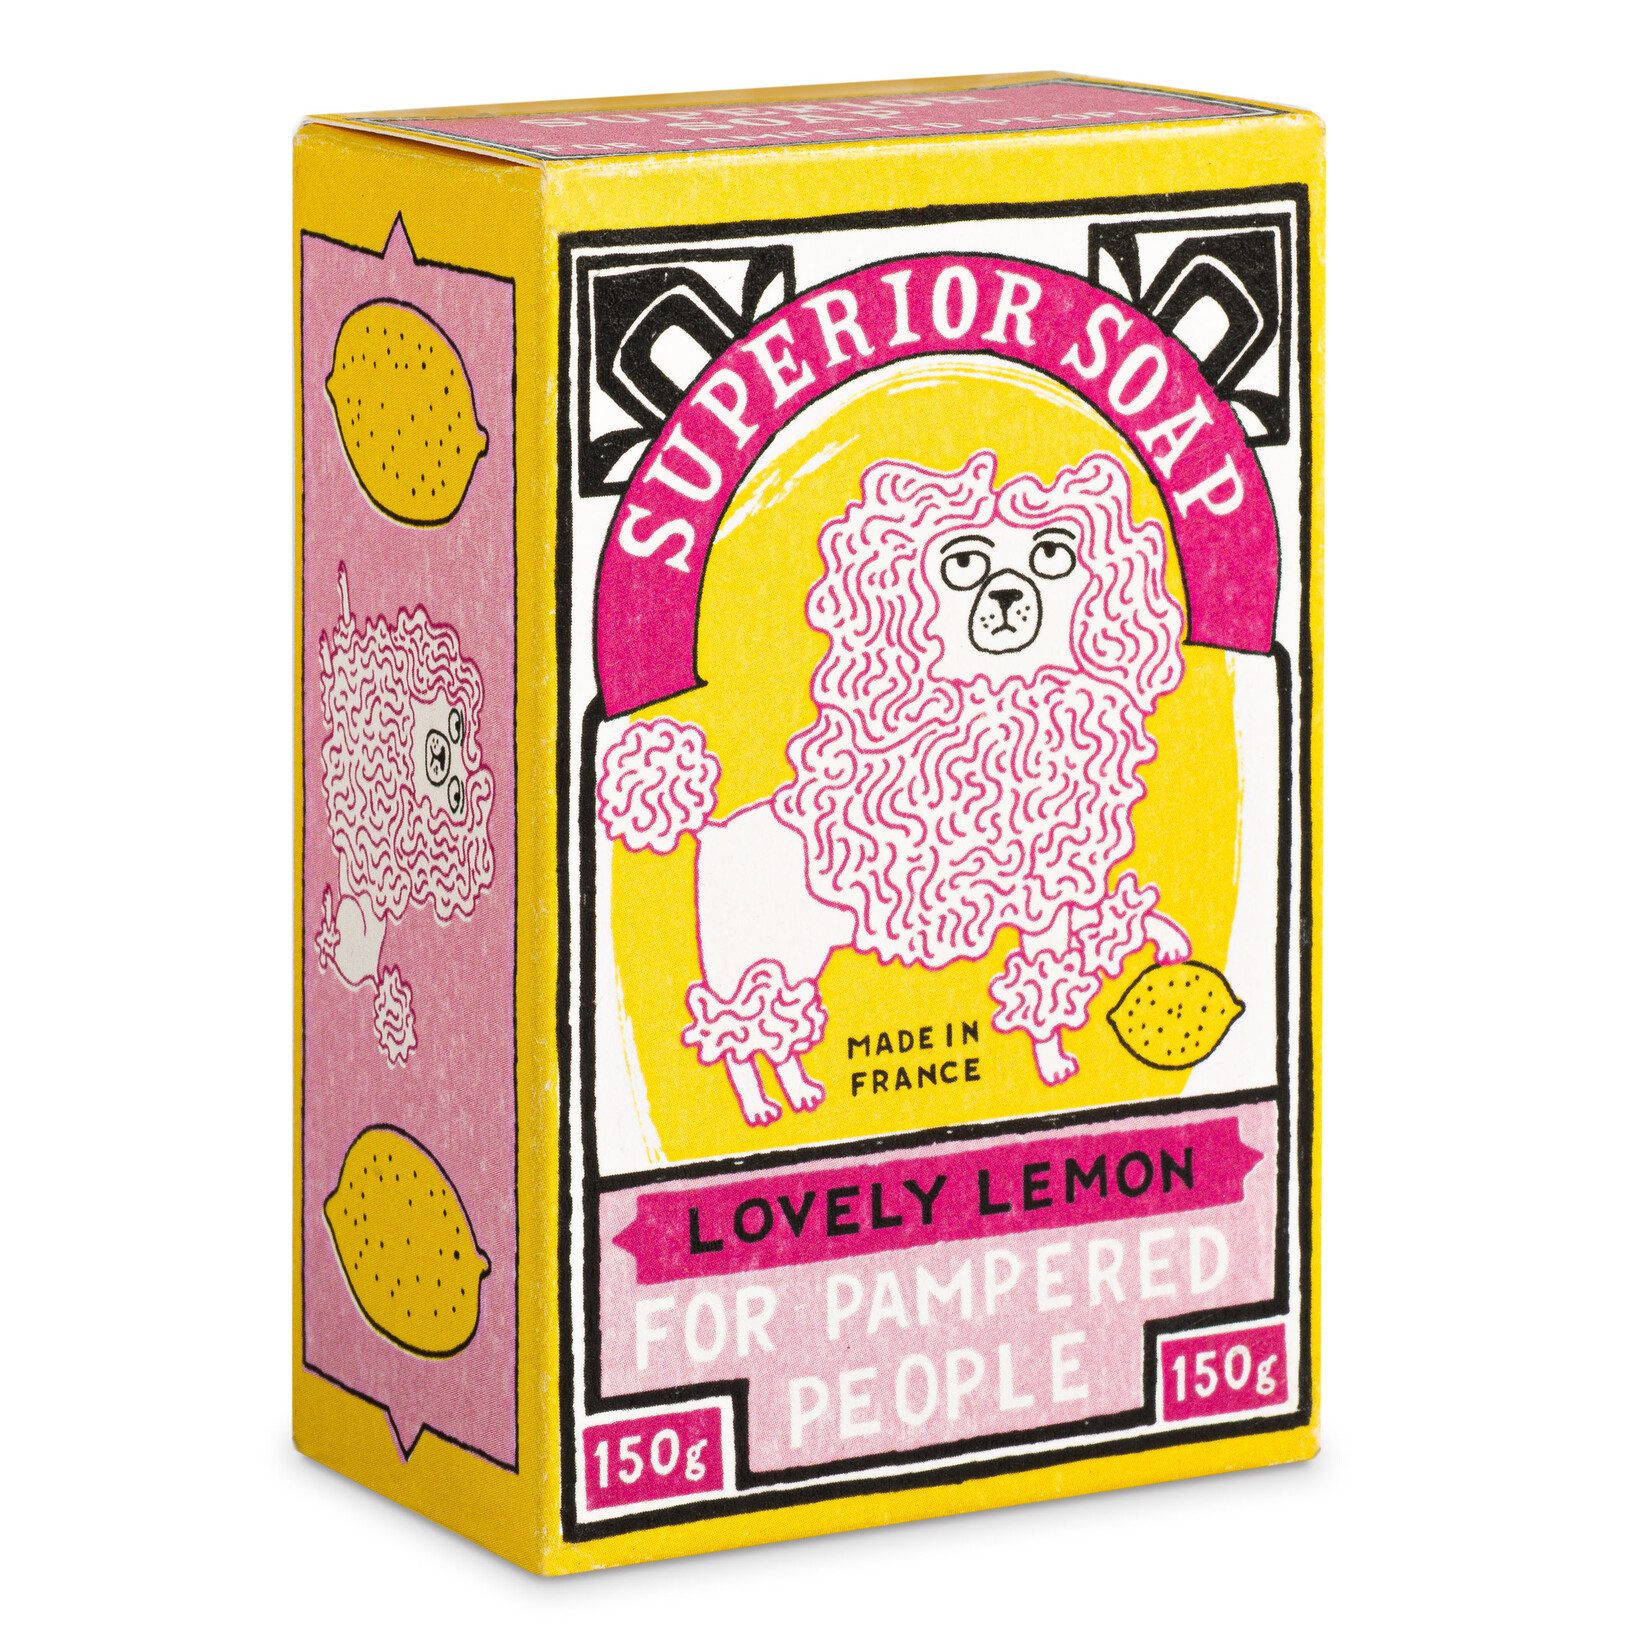 Archivist Superior Soap by Archivist